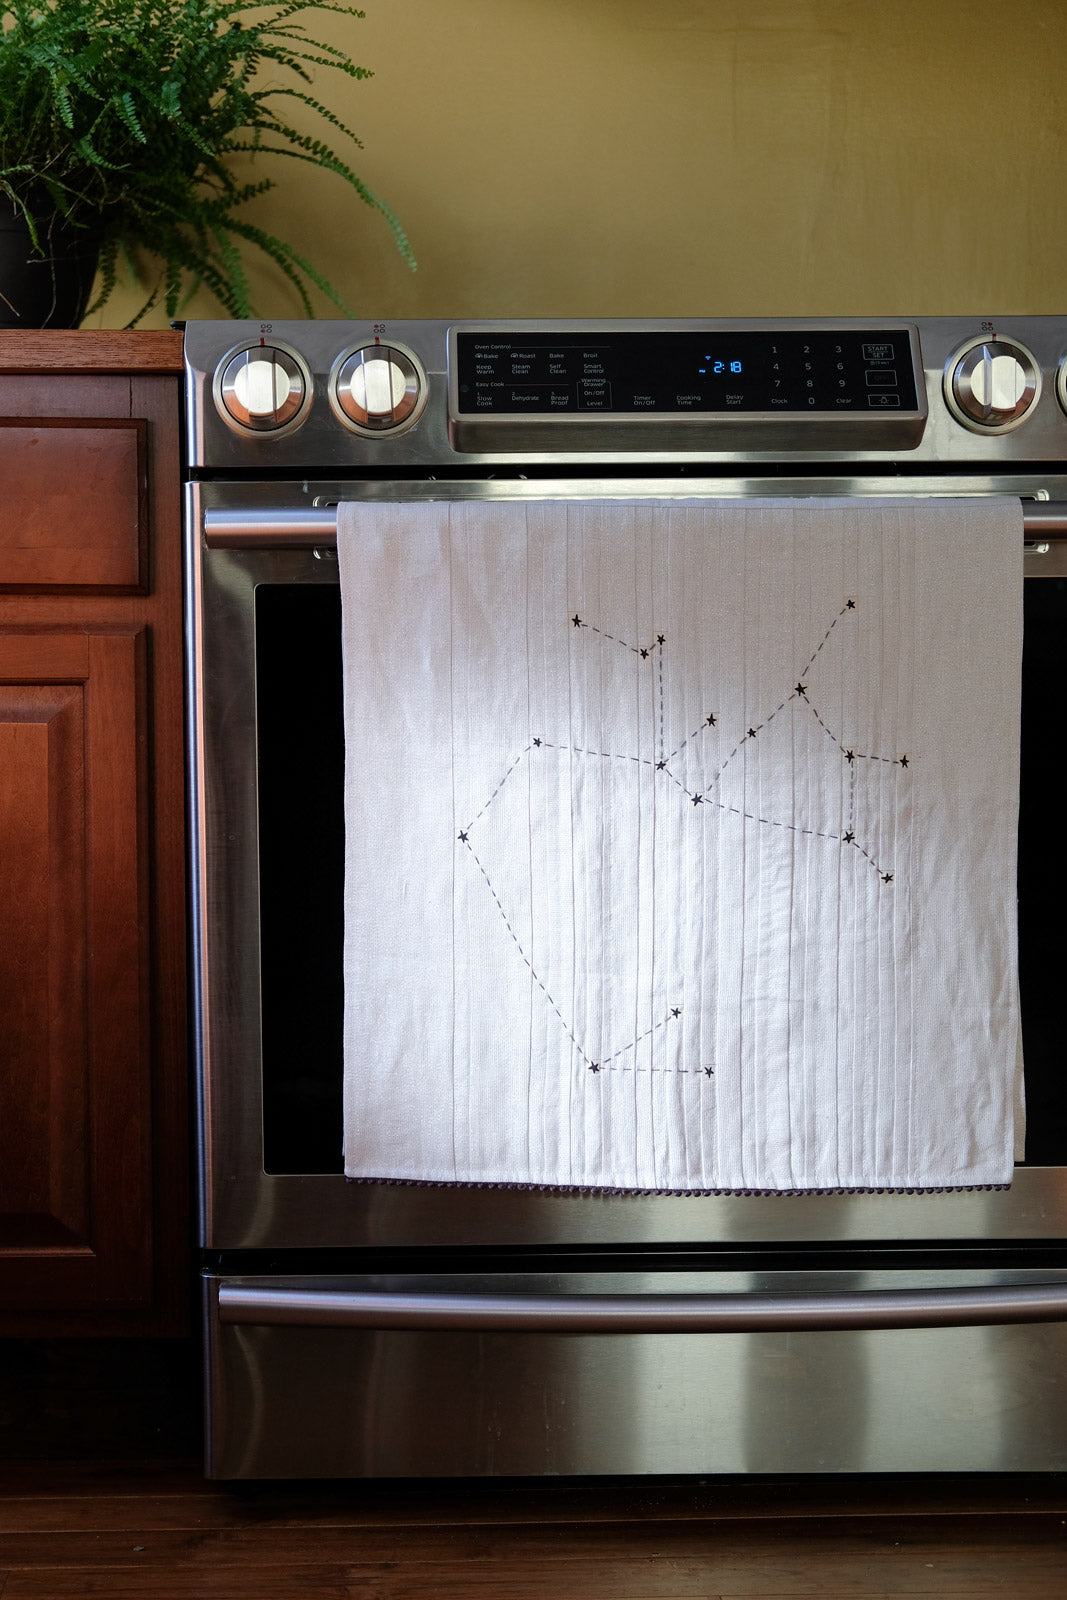 Astrological Tea Towel hanging from an oven handle